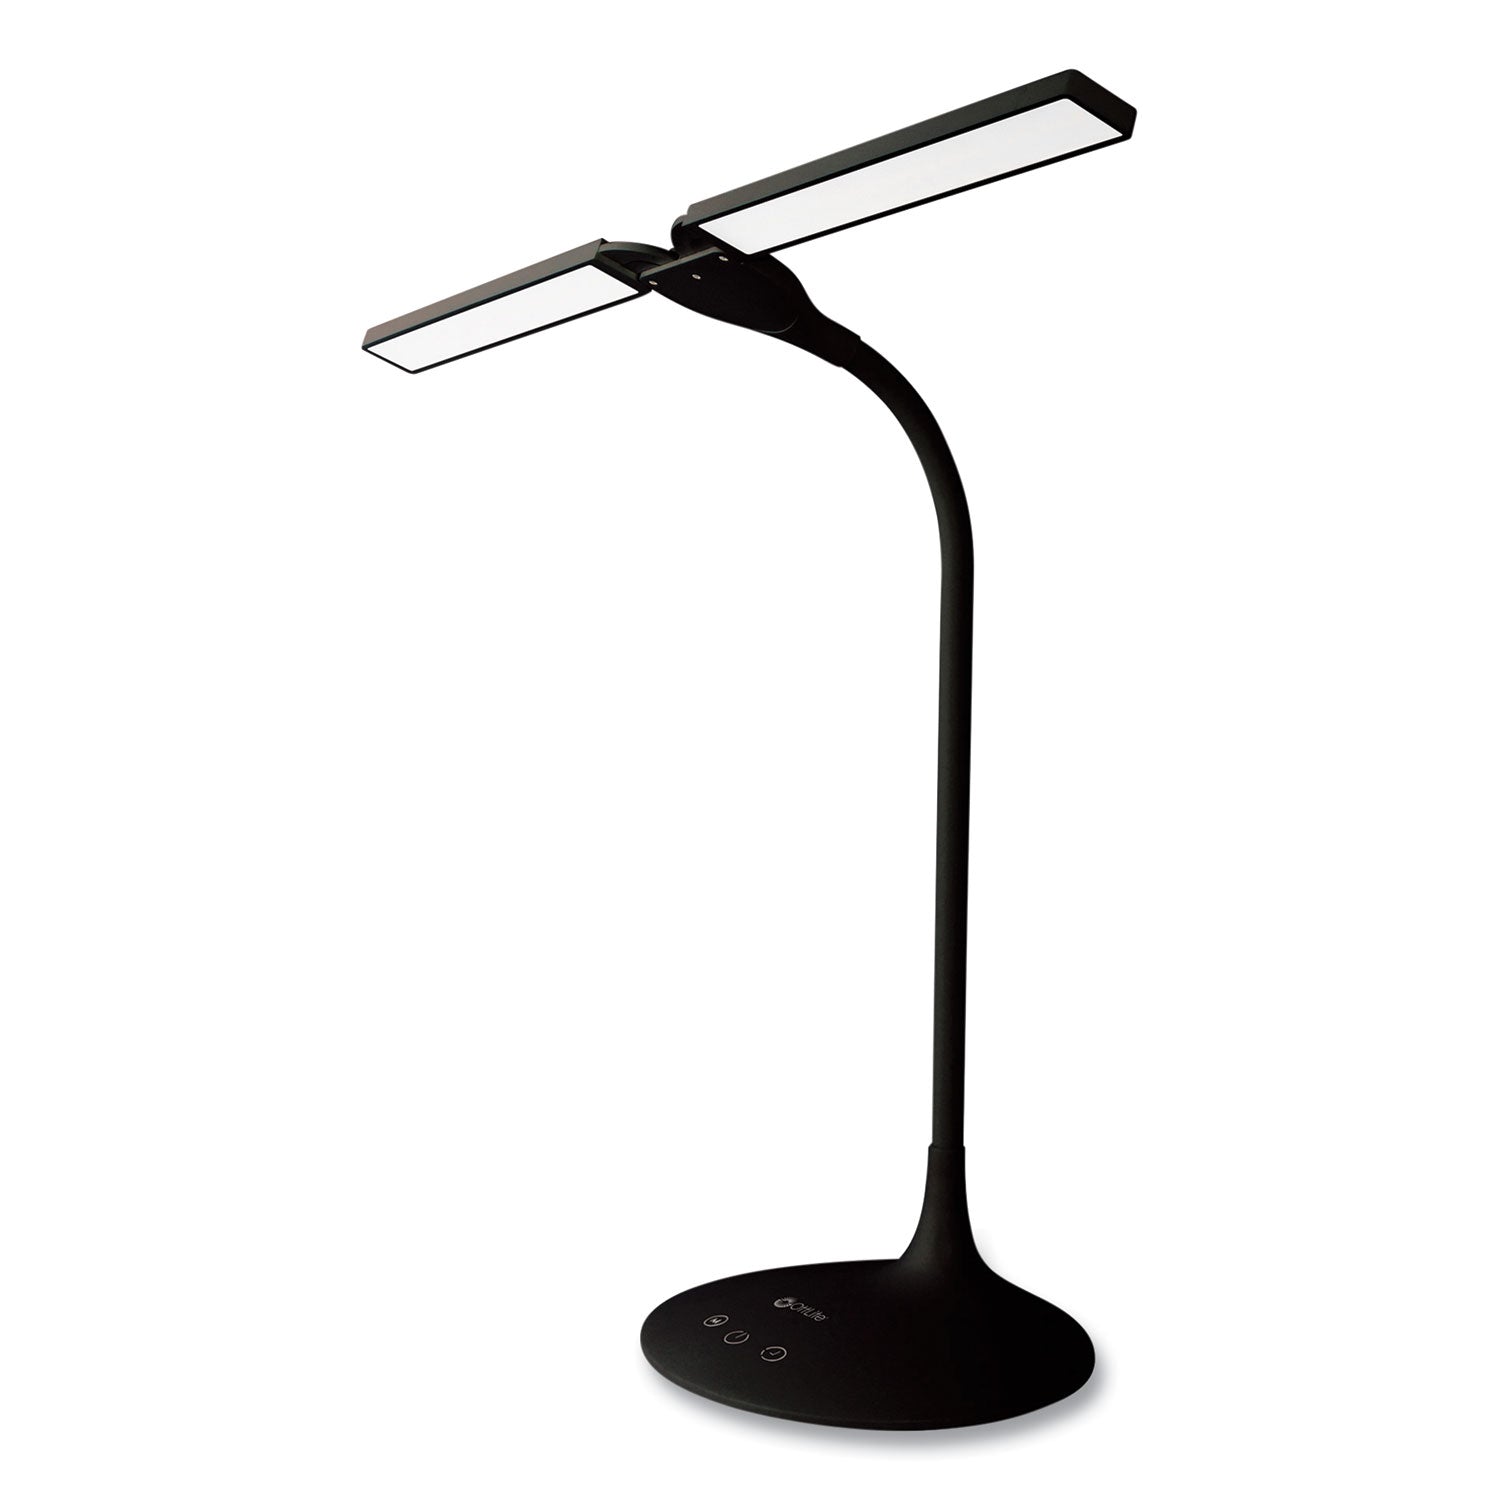 wellness-series-pivot-led-desk-lamp-with-dual-shades-1325-to-26-high-black-ships-in-4-6-business-days_ottcsn59g5w - 1